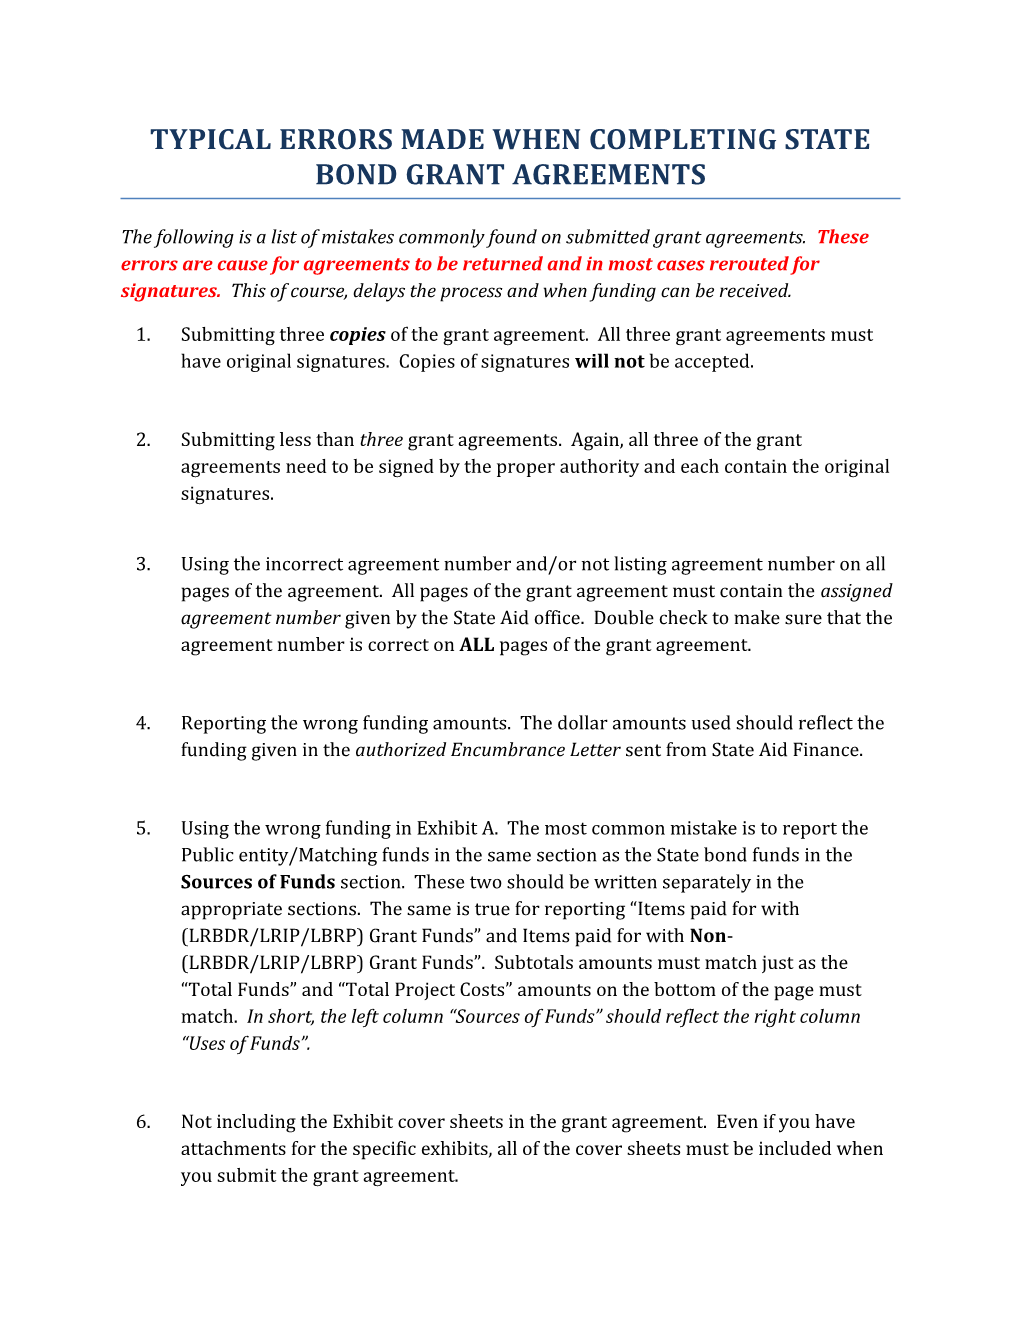 Typical Errors Made When Completing State Bond Grant Agreements